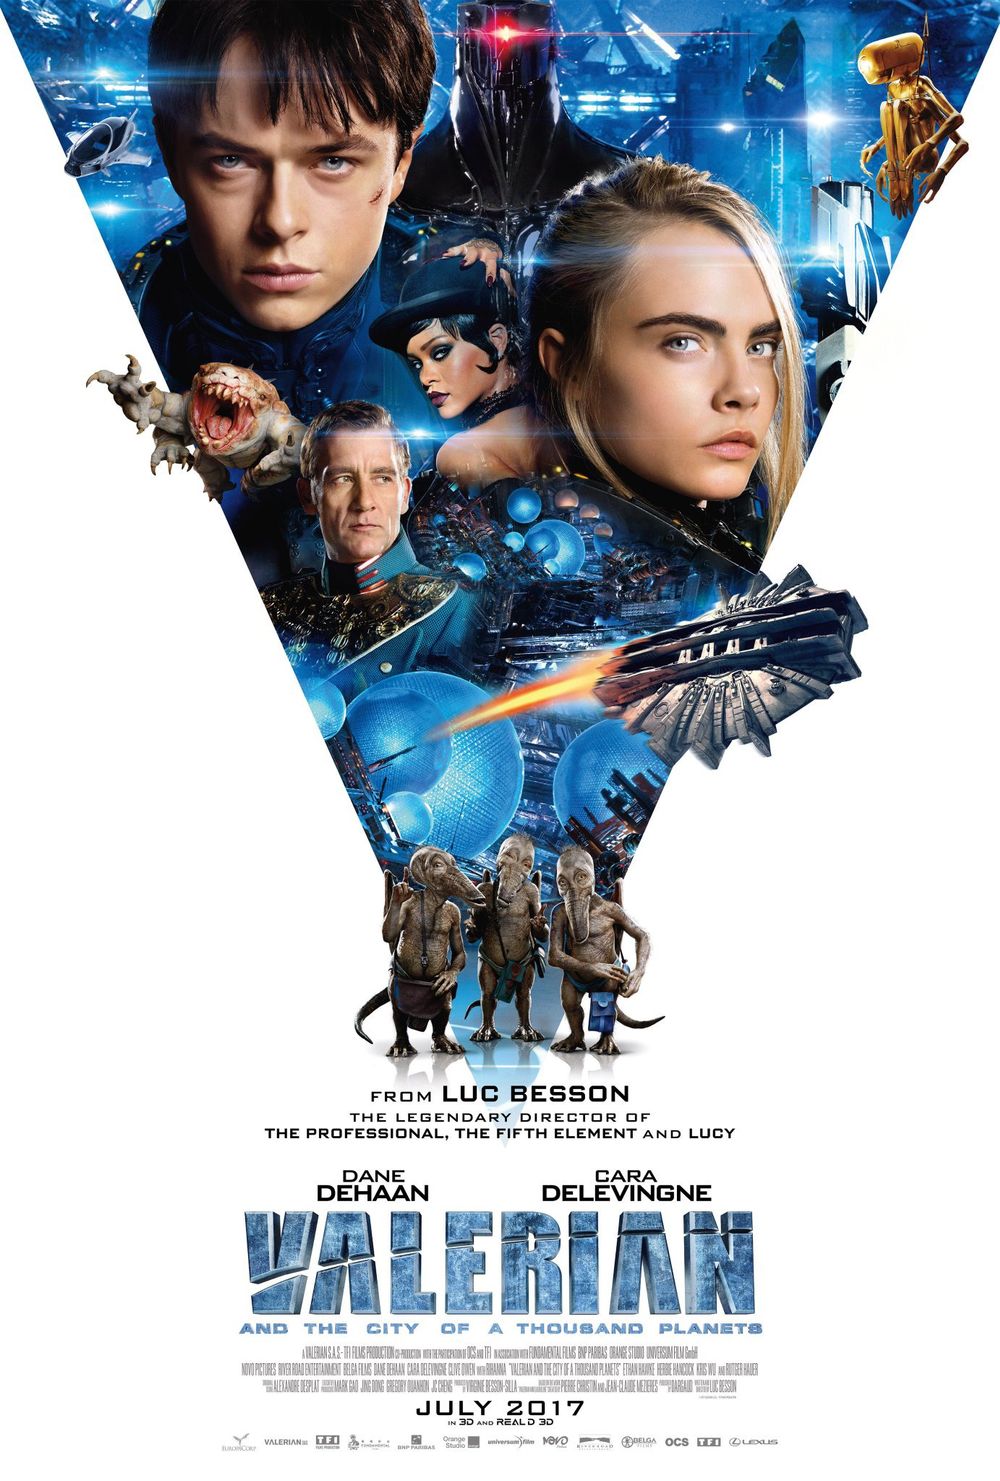 Valerian And The City Of A Thousand Planets Movie Review